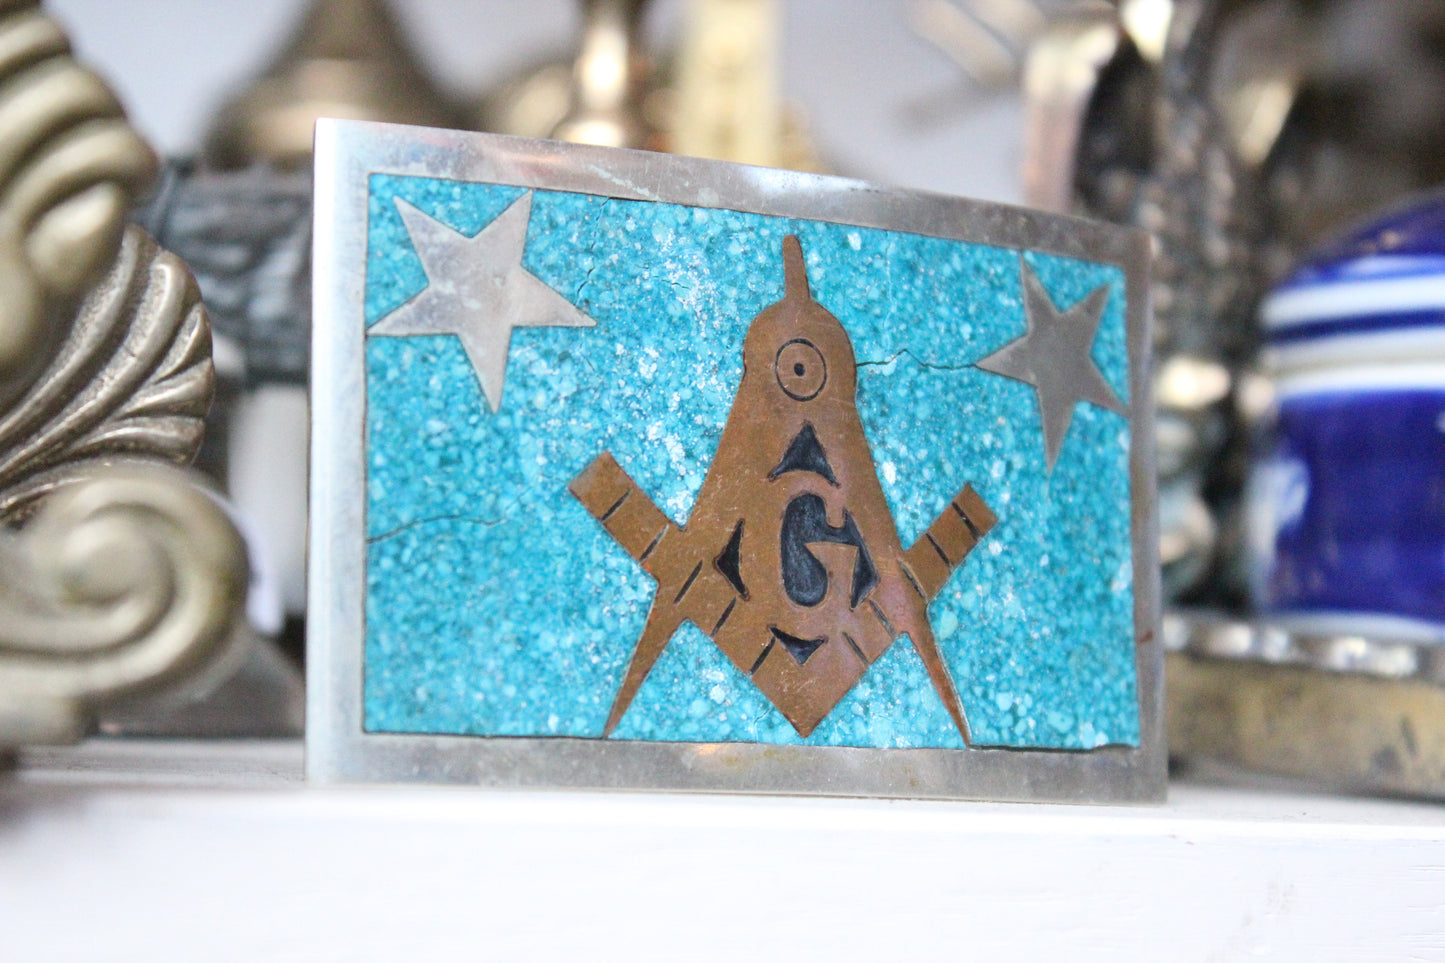 Sterling Silver Free Masons Belt Buckle with Turquoise, Brass, and Enamel Inlay by Taxco, Mexico